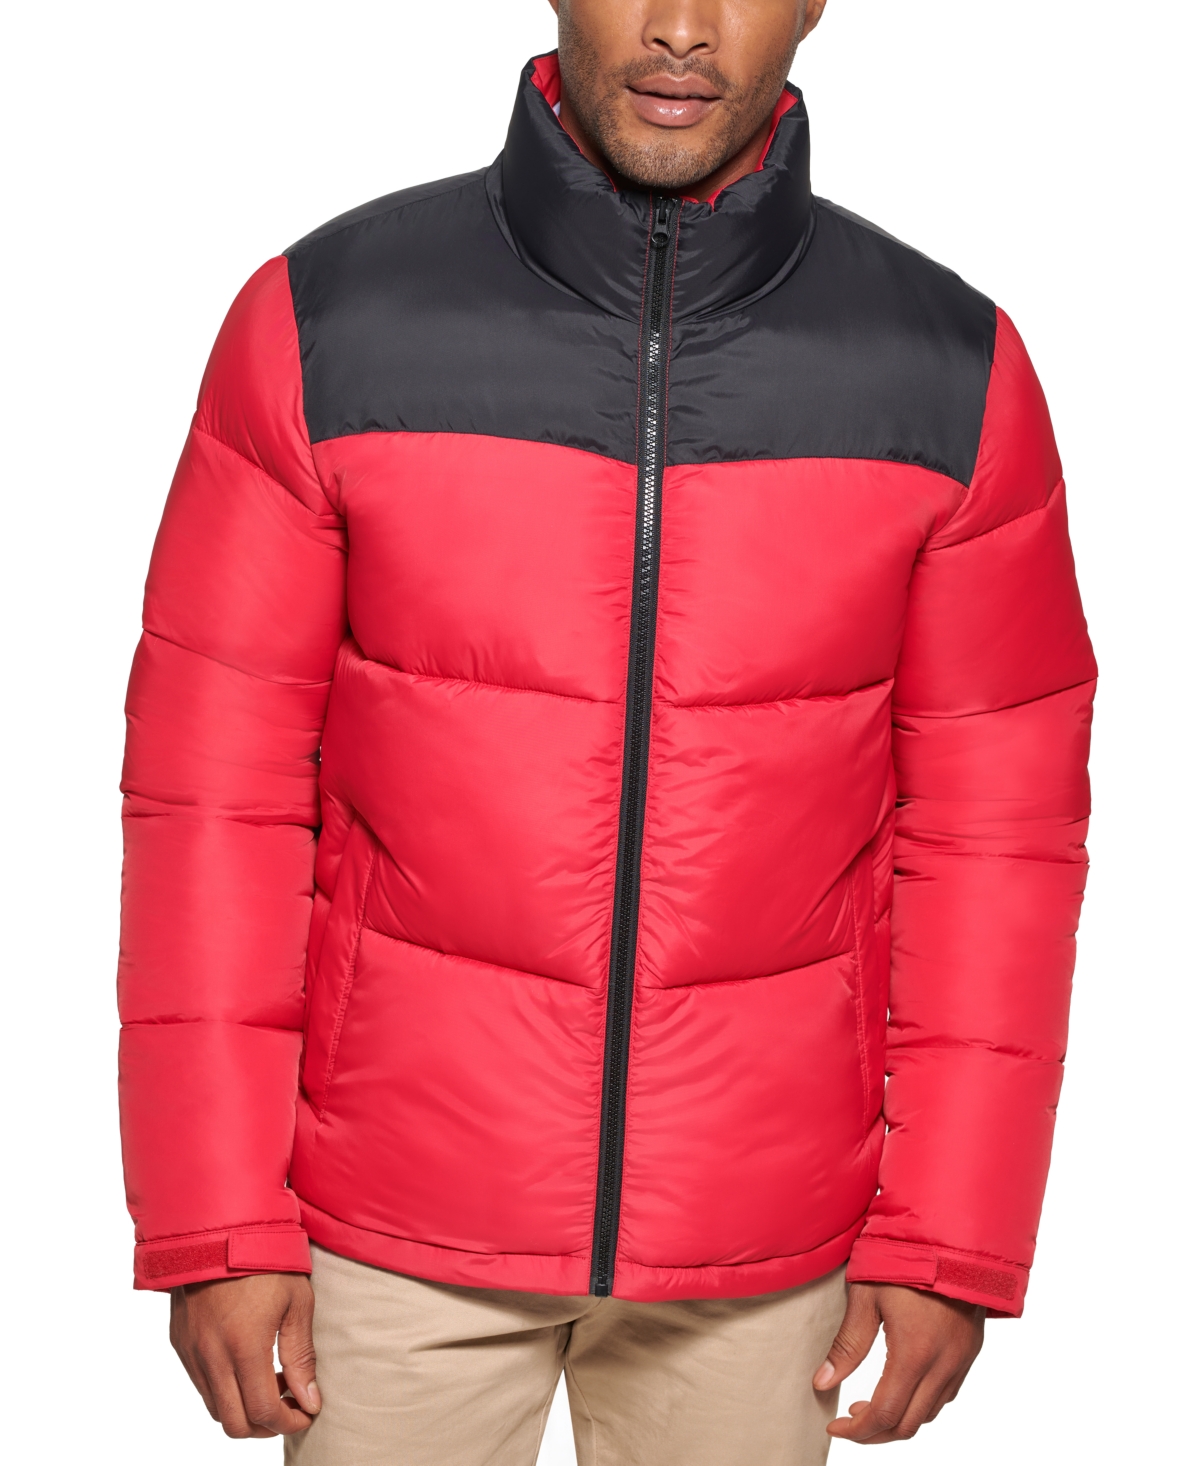 Men's Colorblocked Quilted Full-Zip Puffer Jacket, Created for Macy's - Olive